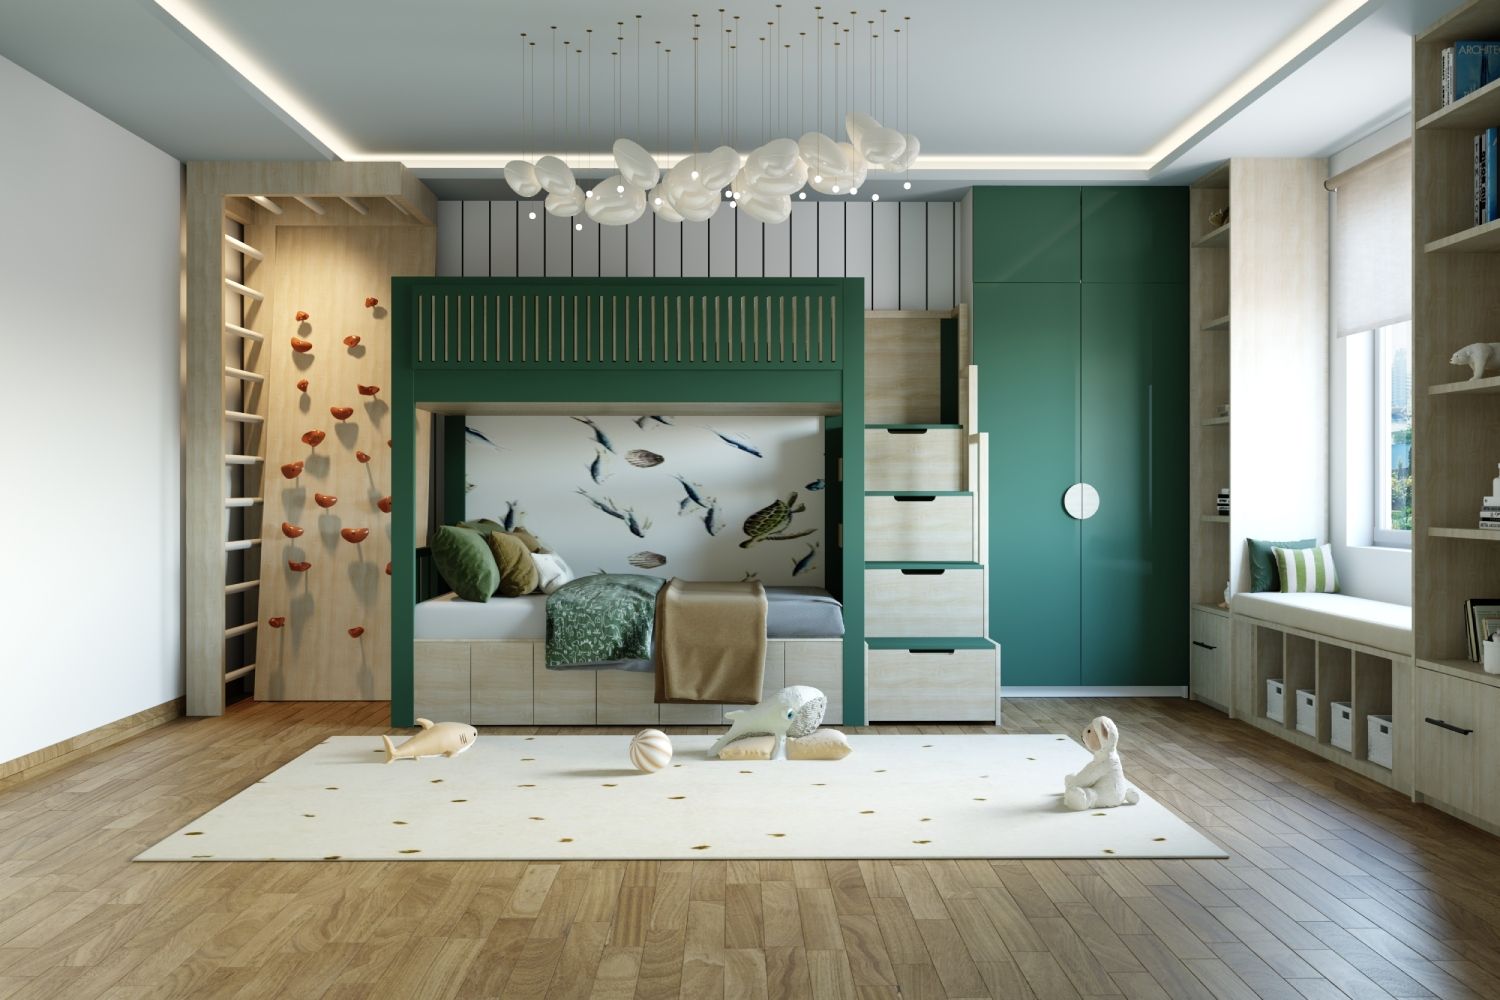 Contemporary Kids Room Design With A Bunk Bed With Built-In Storage